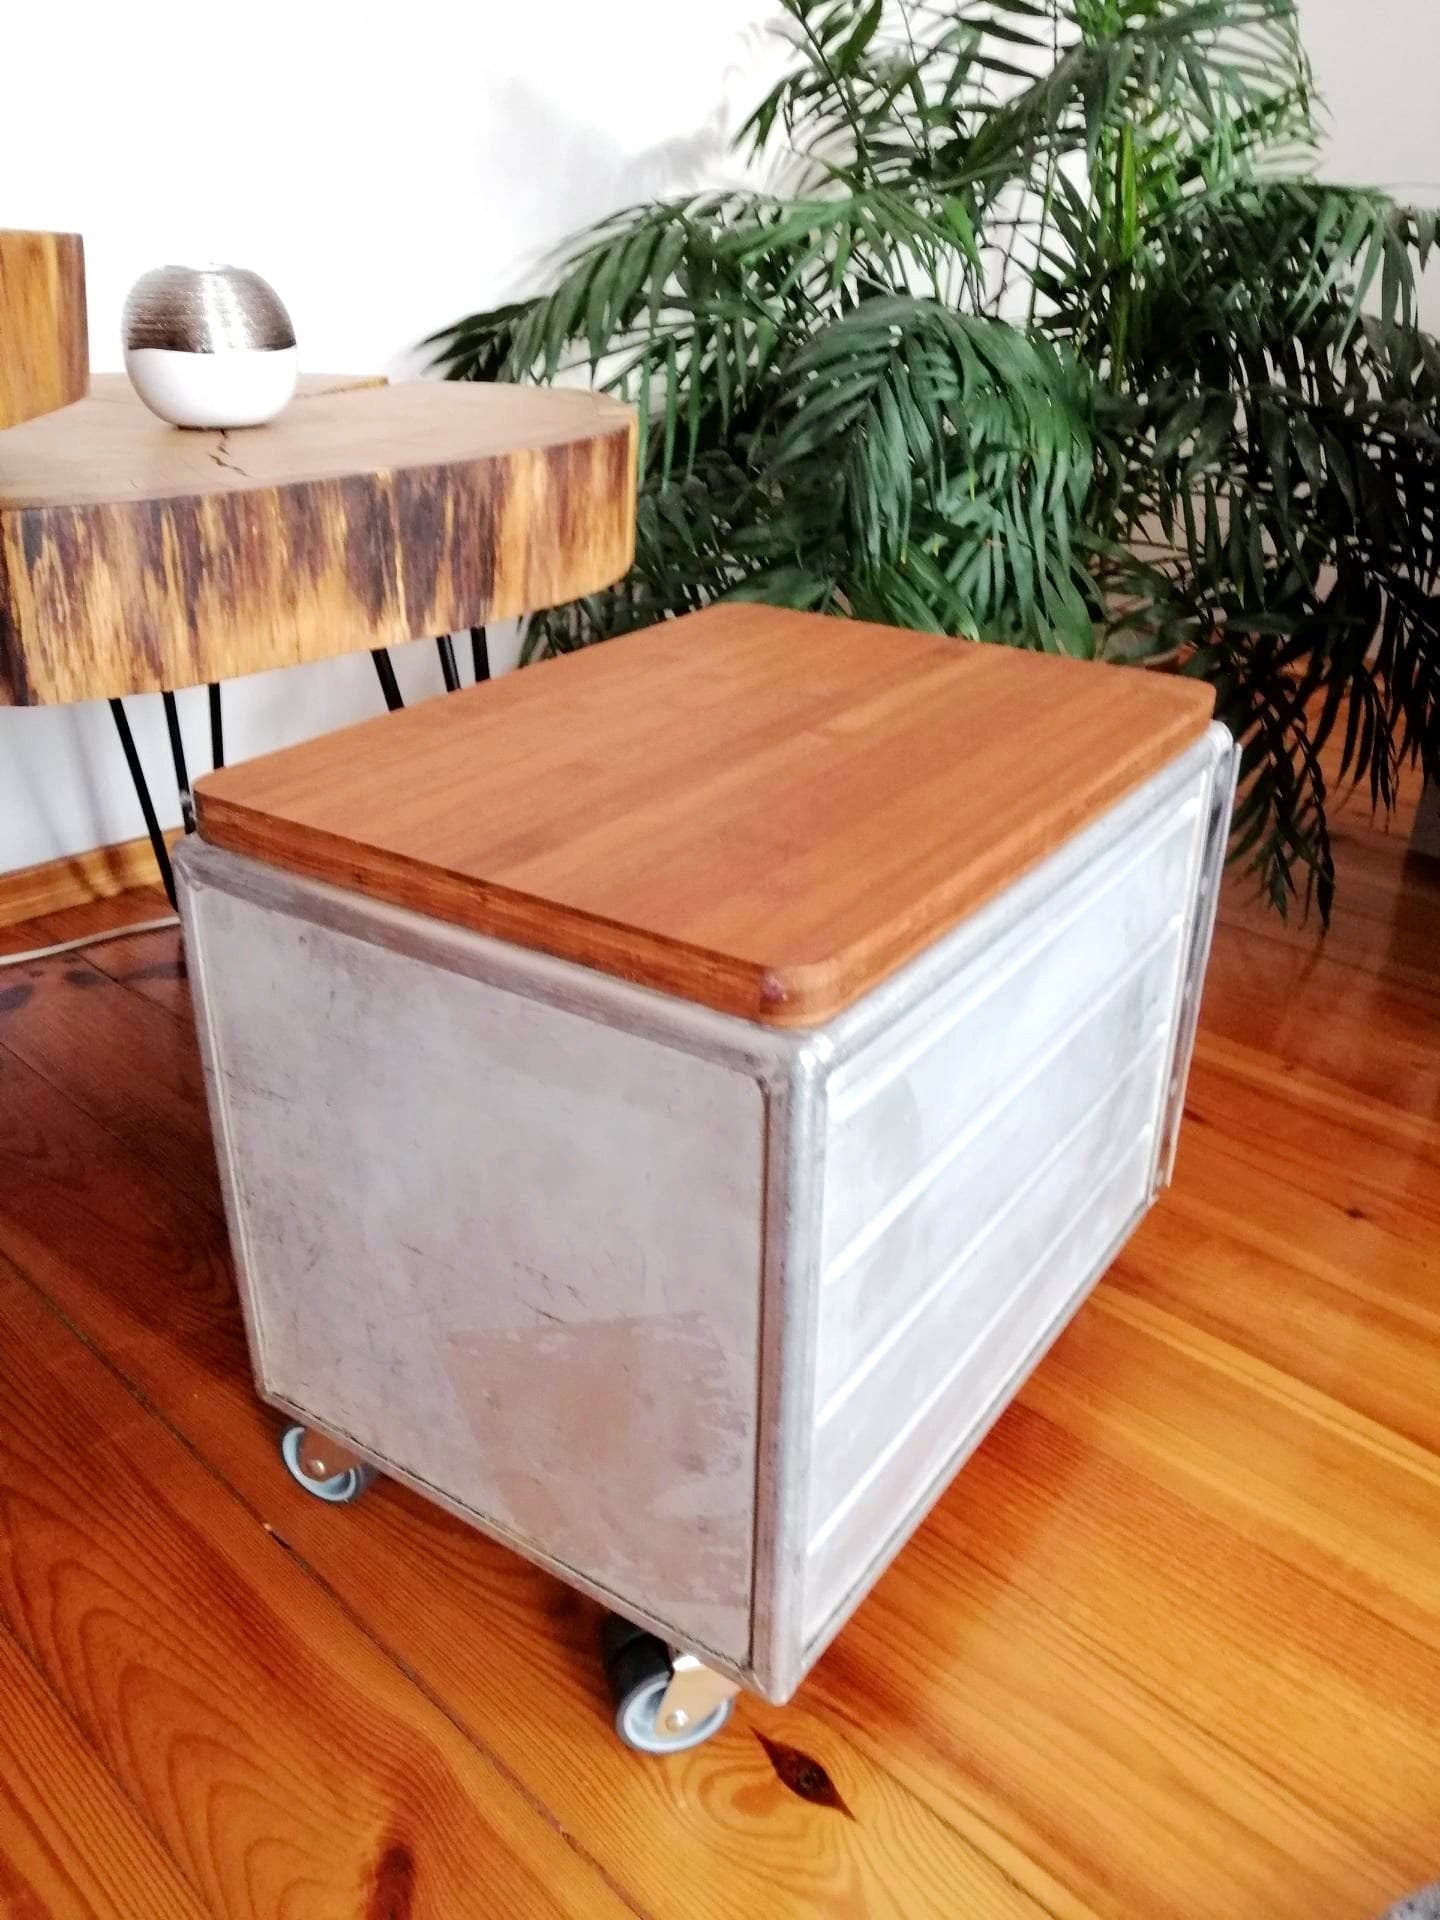 El Al Israel Airlines Side Table Galley Box | Upcycled Airplane Cabinet, Aviation Cupboard | Worldwide Shipping